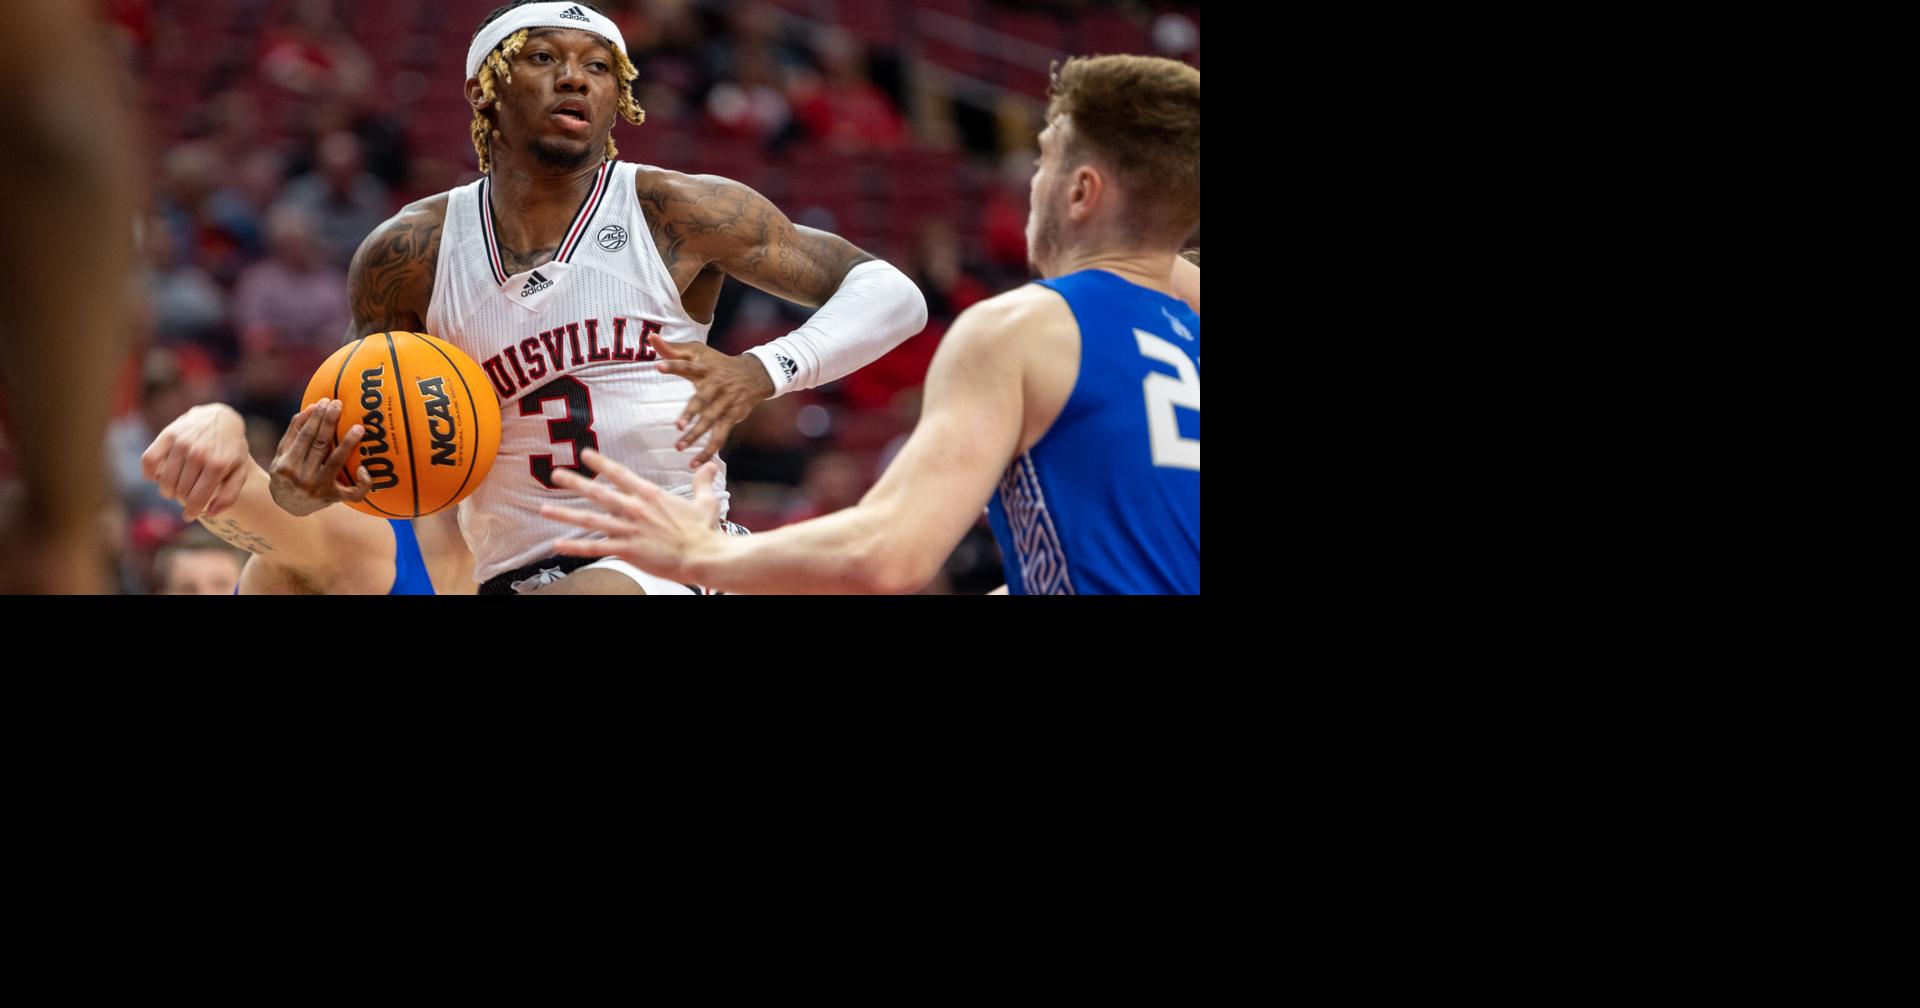 After declaring for the NBA Draft, Louisville's Ellis says he will enter  the transfer portal | Sports 